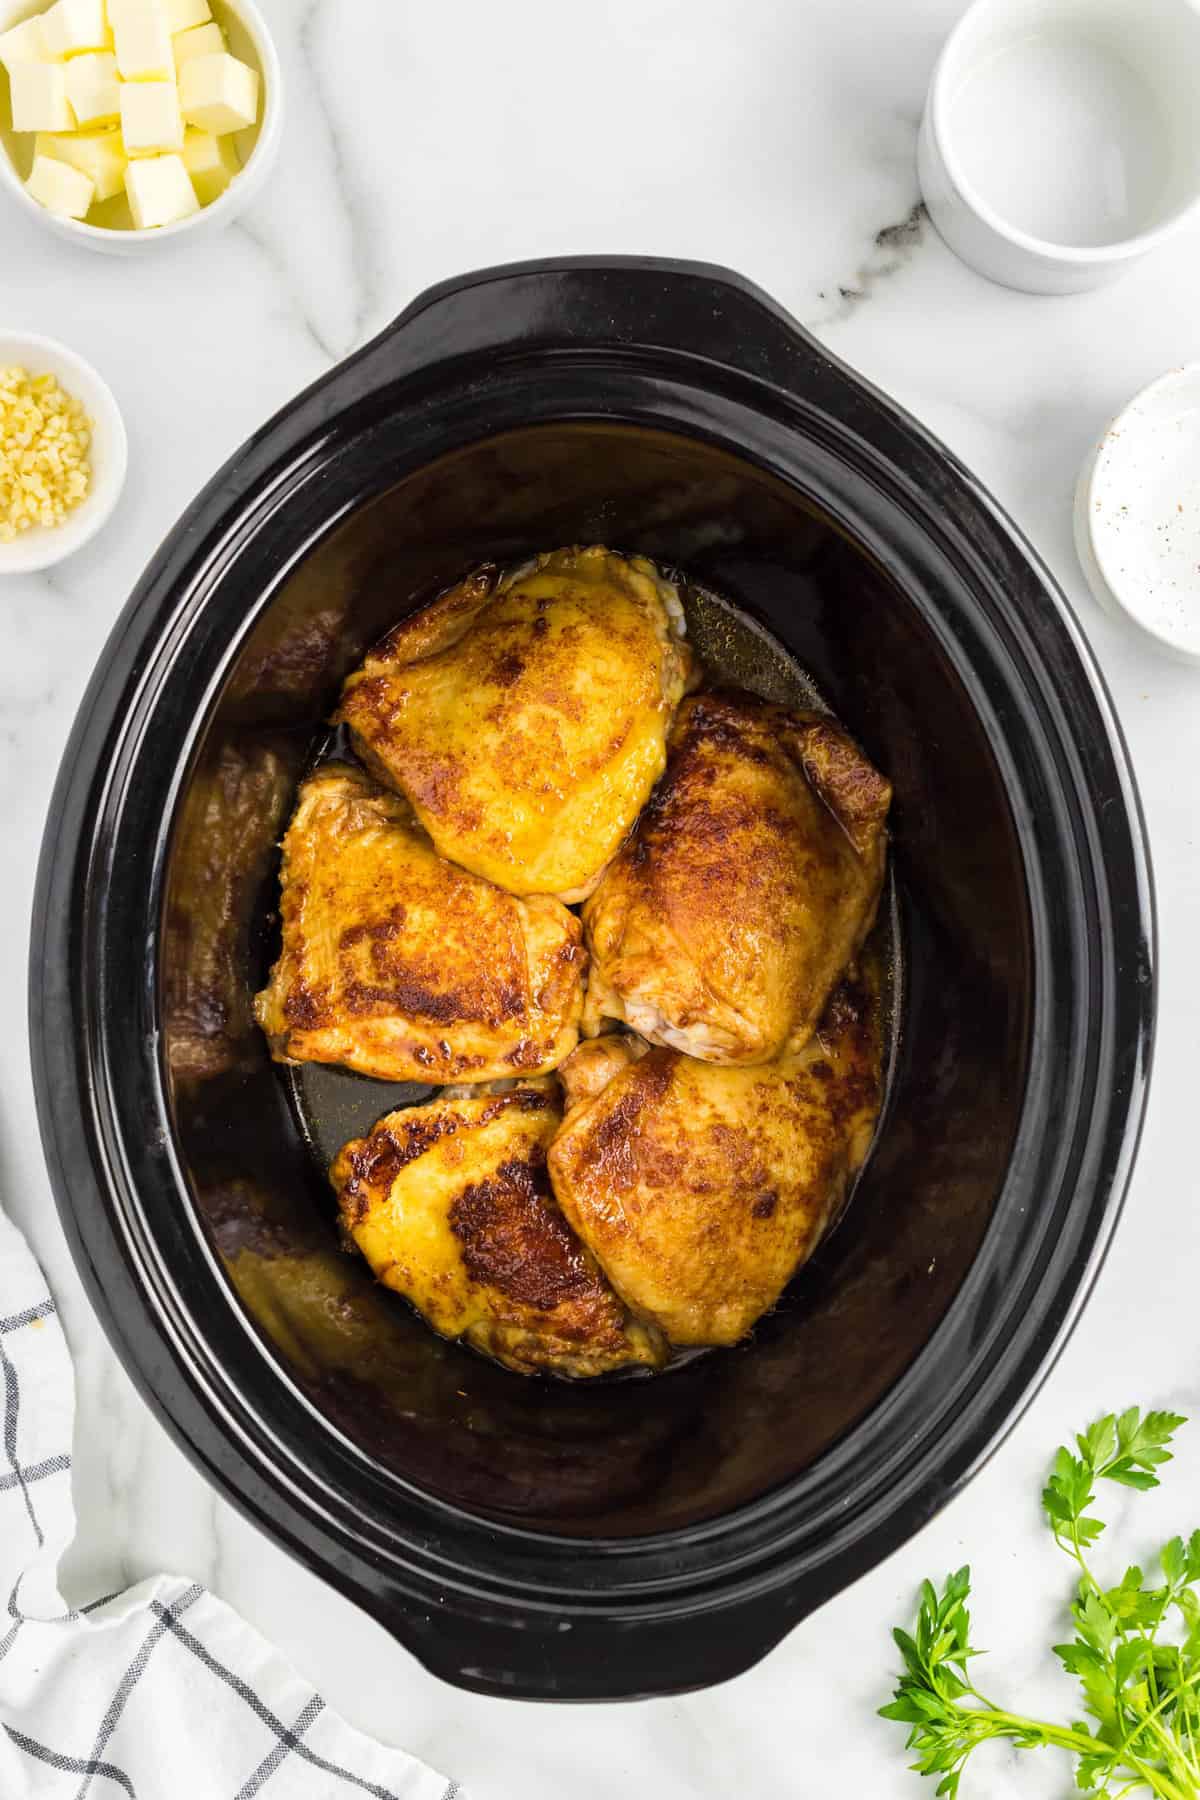 Adding chicken thighs to crock pot for Slow Cooker Chicken Thighs recipe